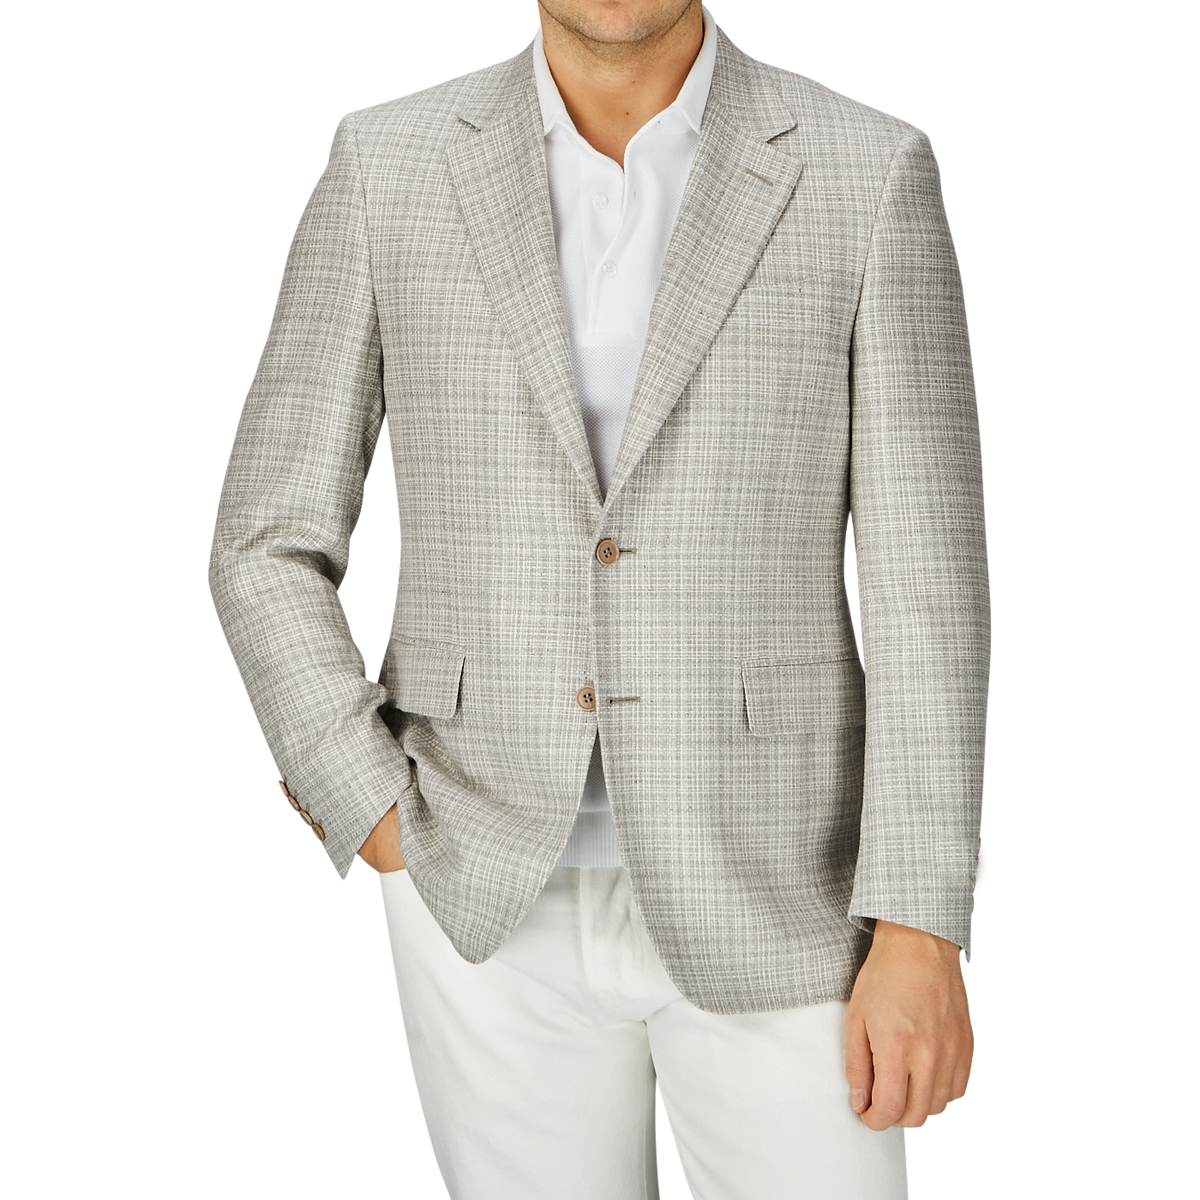 Man in a fitted beige melange silk wool basketweave blazer by Canali over a white shirt, with a partial view of white pants, standing against a grey background.